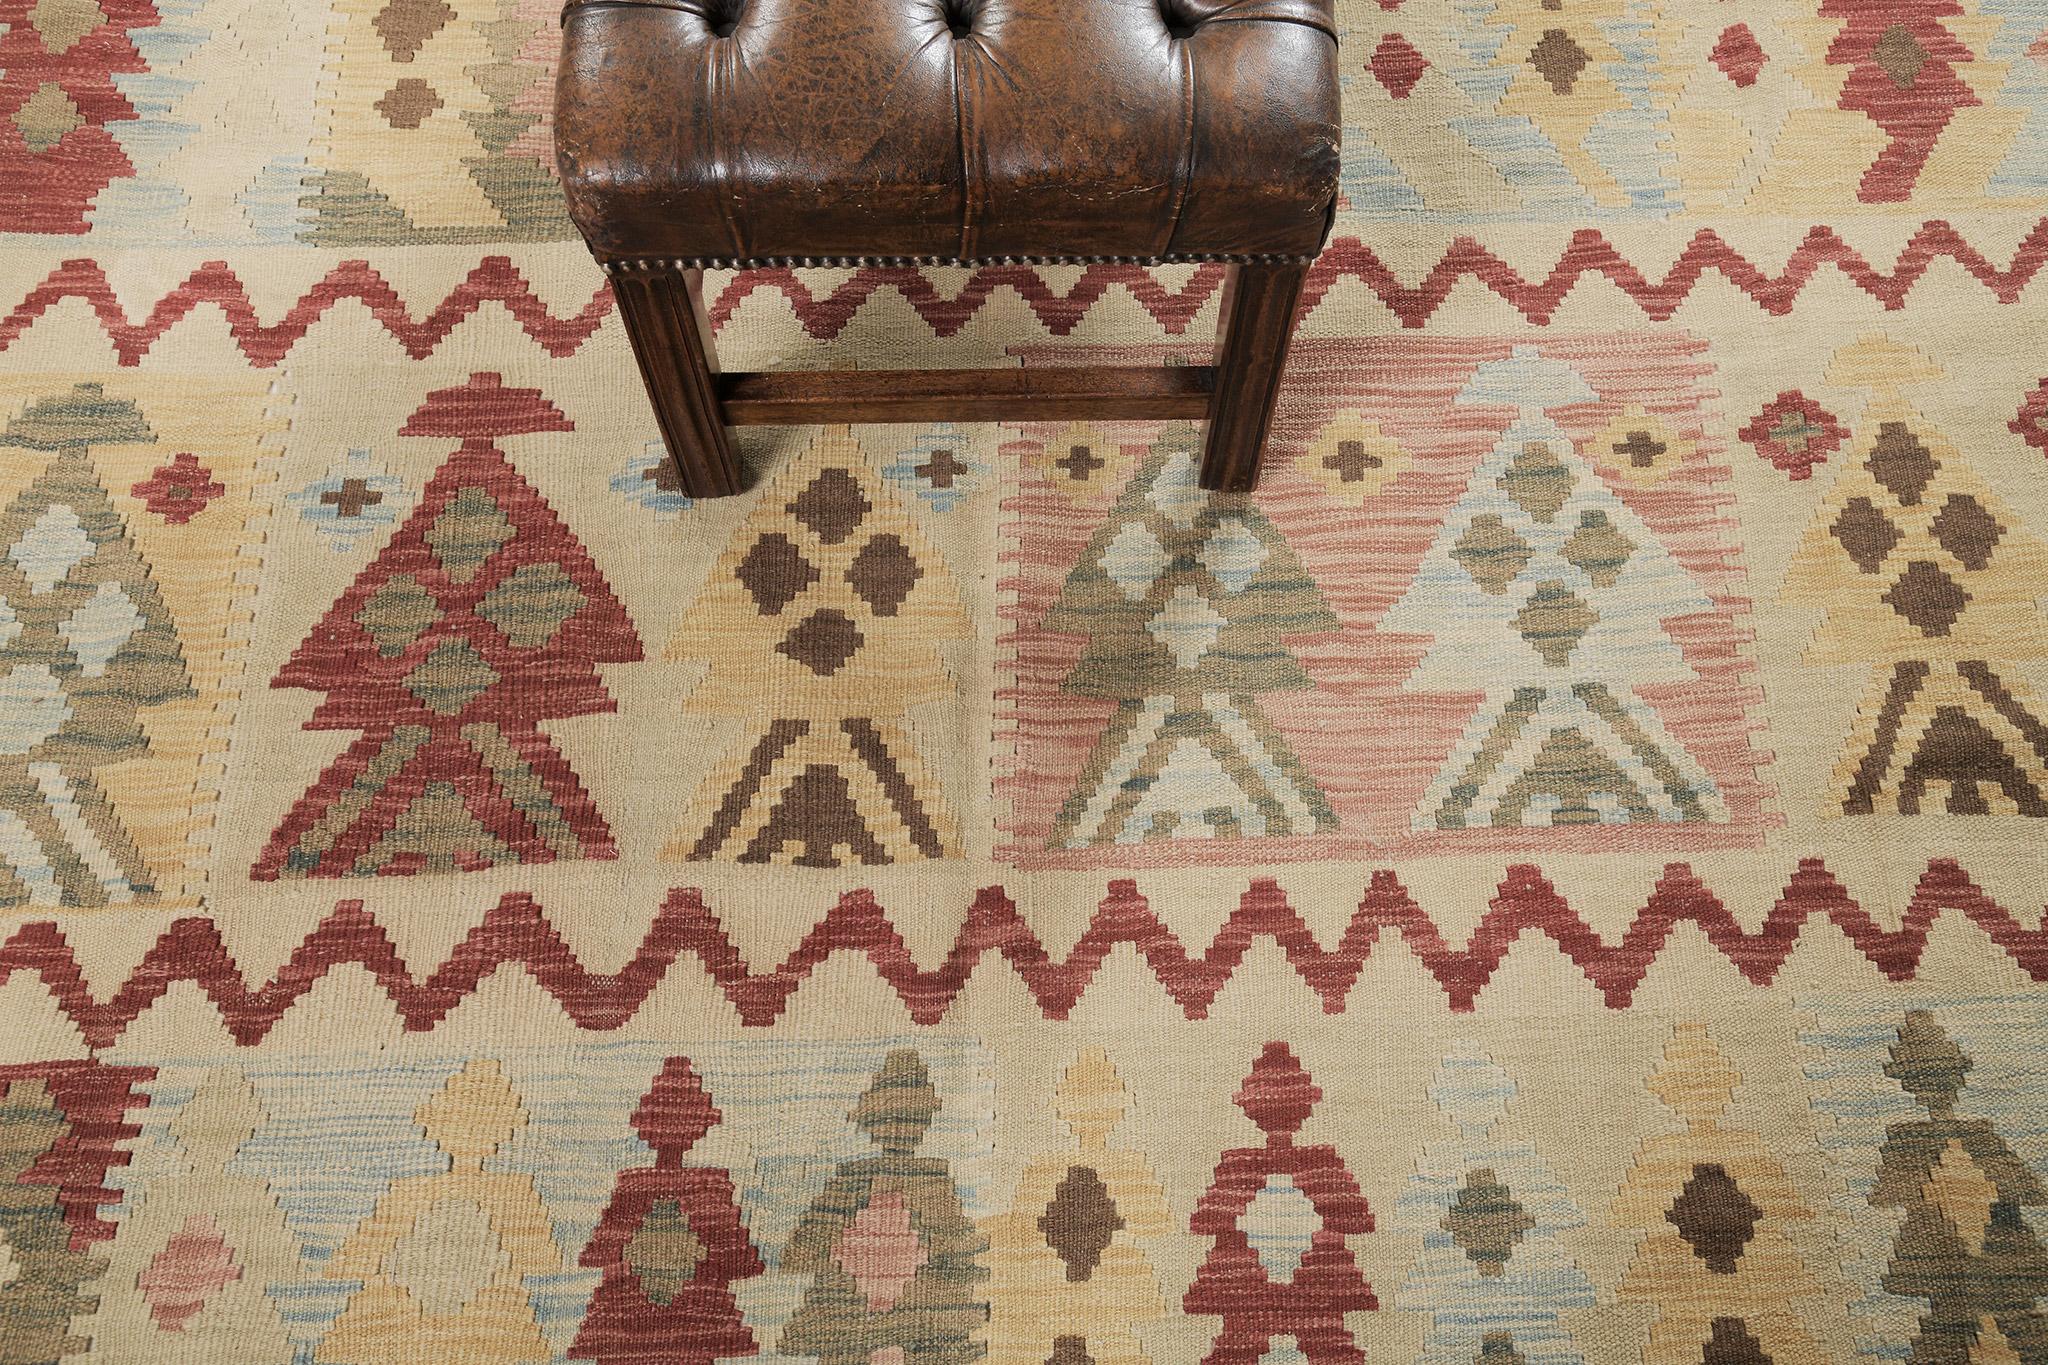 Noting a remarkable effect creating a powerful story, this flatweave Kilim rug adds texture and modest graphic appeal forming a festive but relaxed space. The field is covered in a zigzag pattern and multicolored diamonds. Displaying a stunning